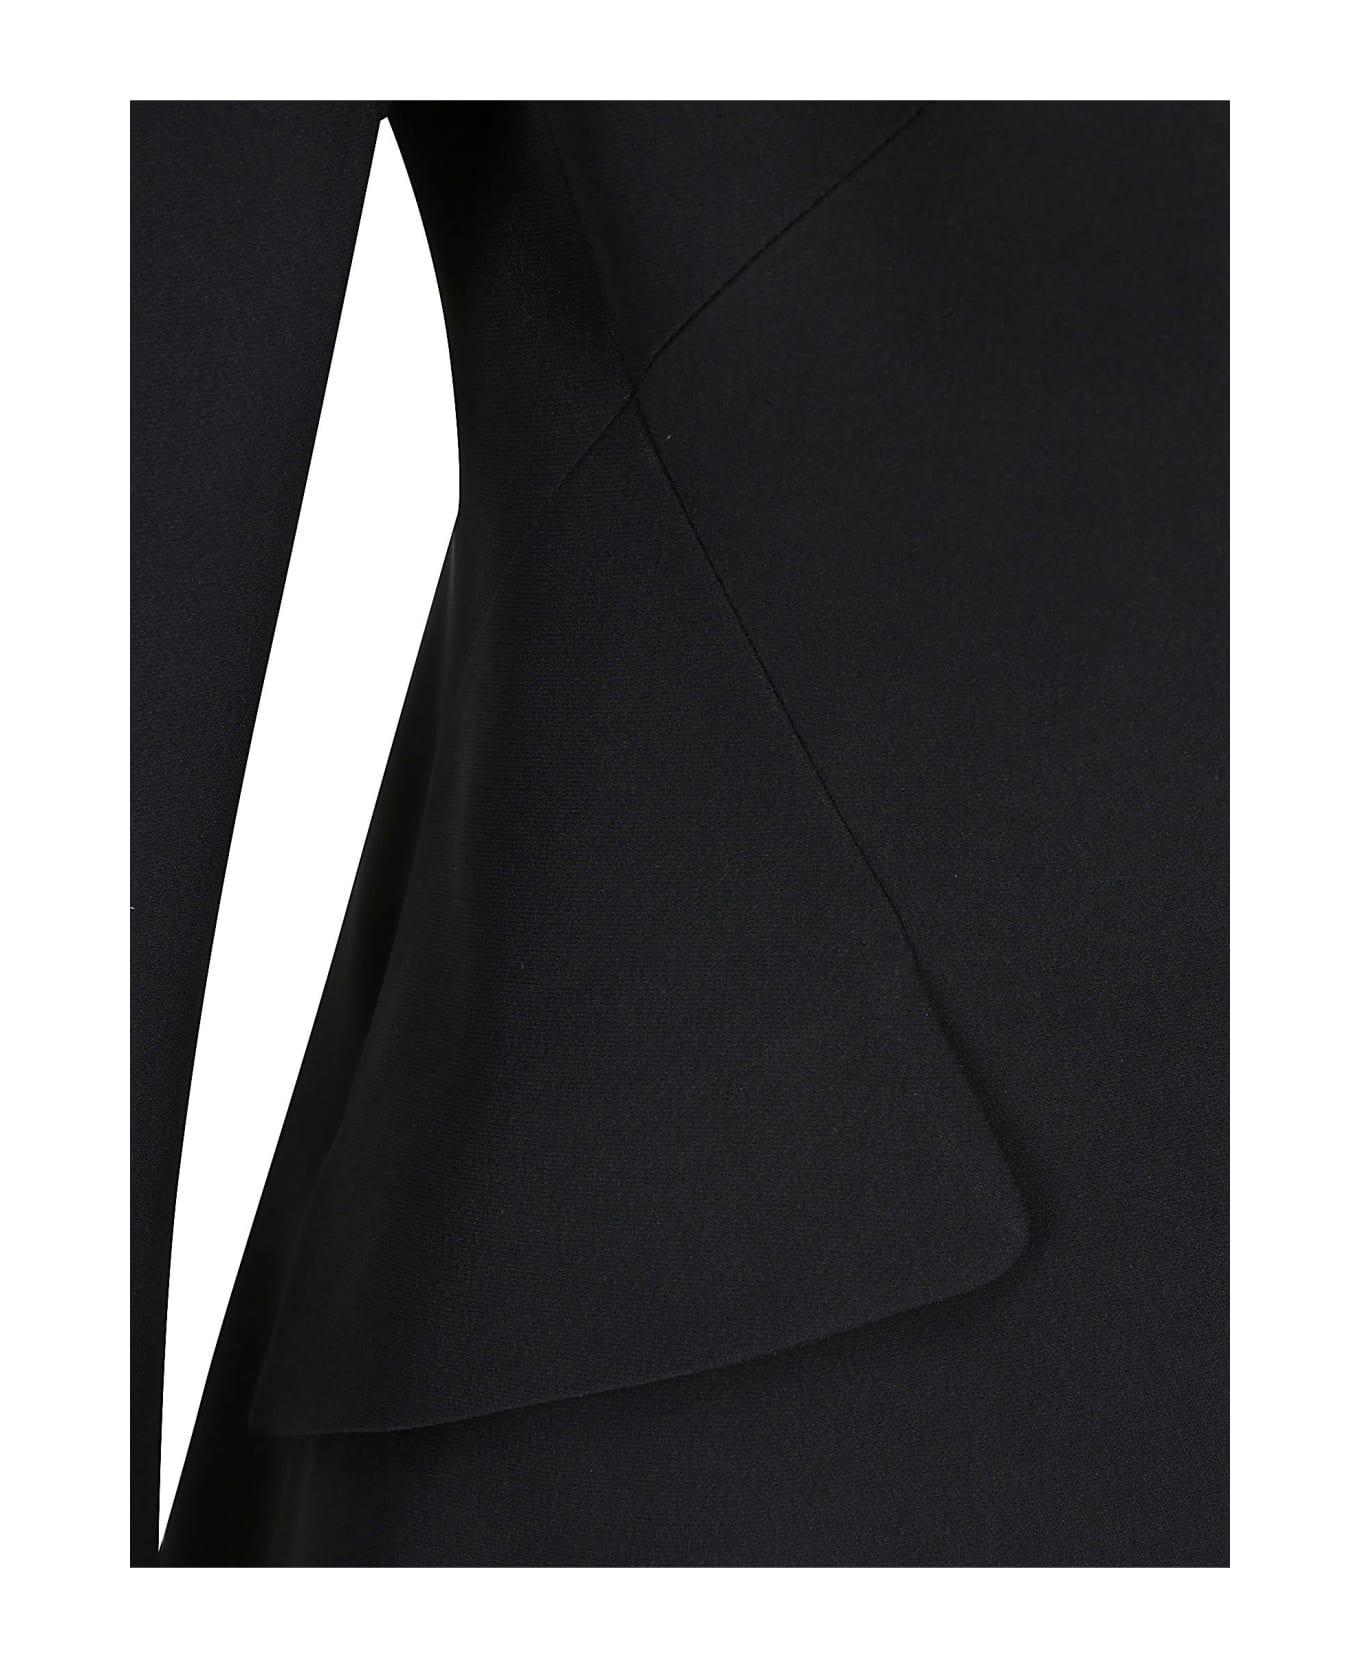 Alexander McQueen Black Jacket In Thin Crepe With Pointed Shoulders - Nero